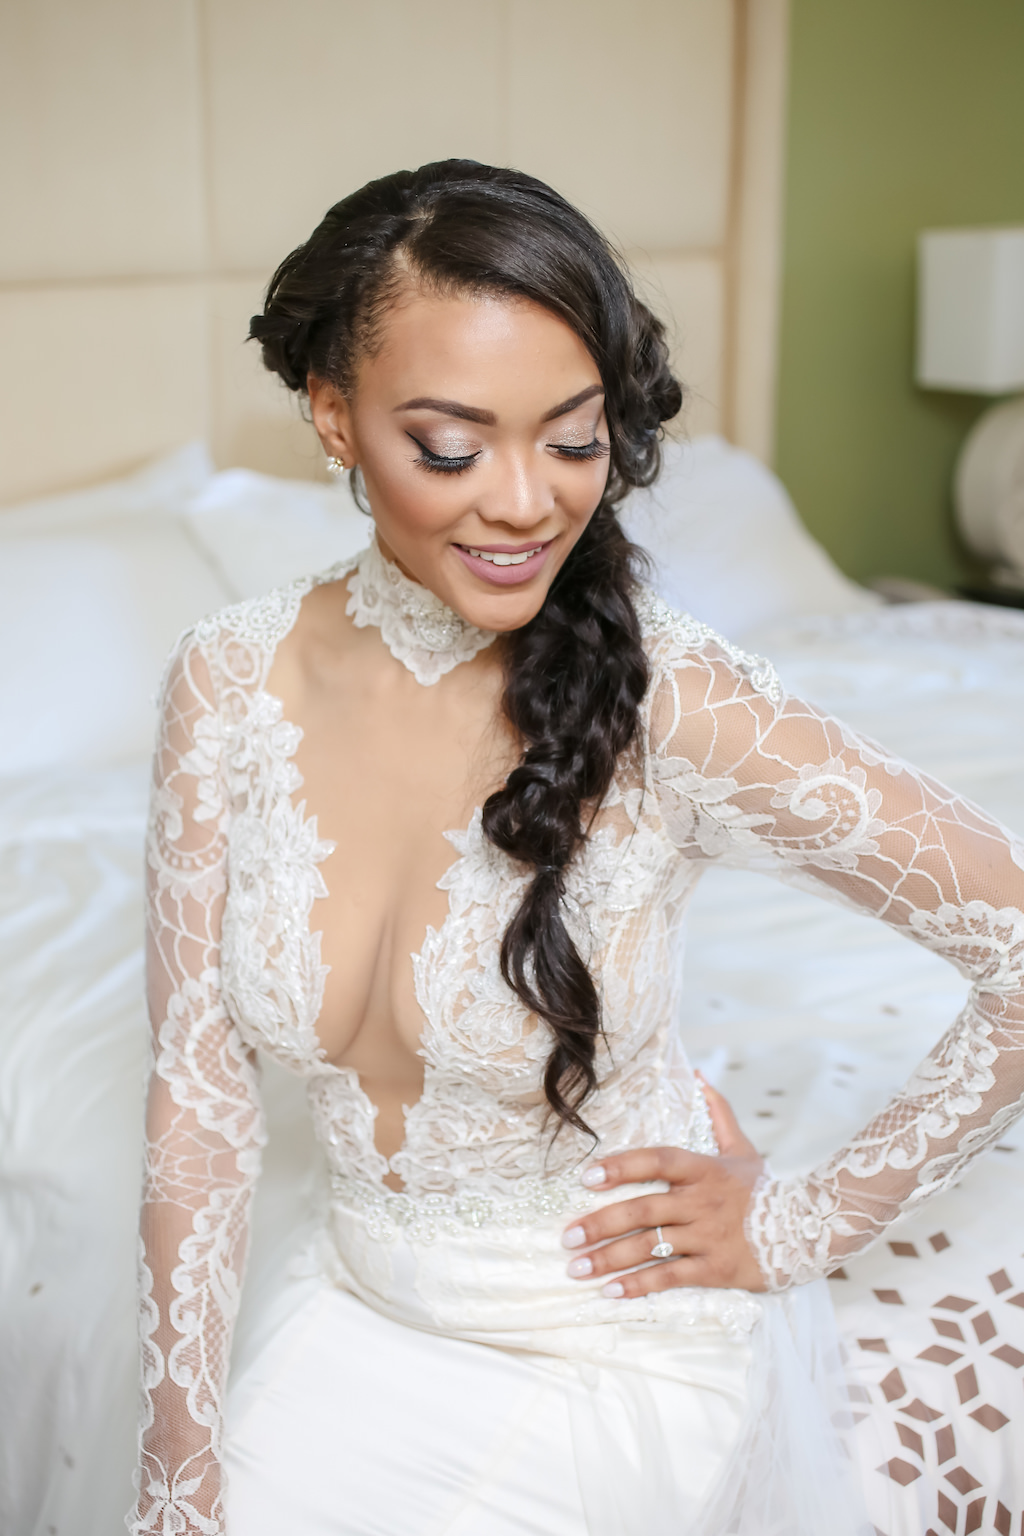 Bride Getting Ready Portrait, Lace and Sheer Long Sleeve Low V-Neck Wedding Dress and Braided Hairstyle | St. Petersburg Photographer Lifelong Photography Studios